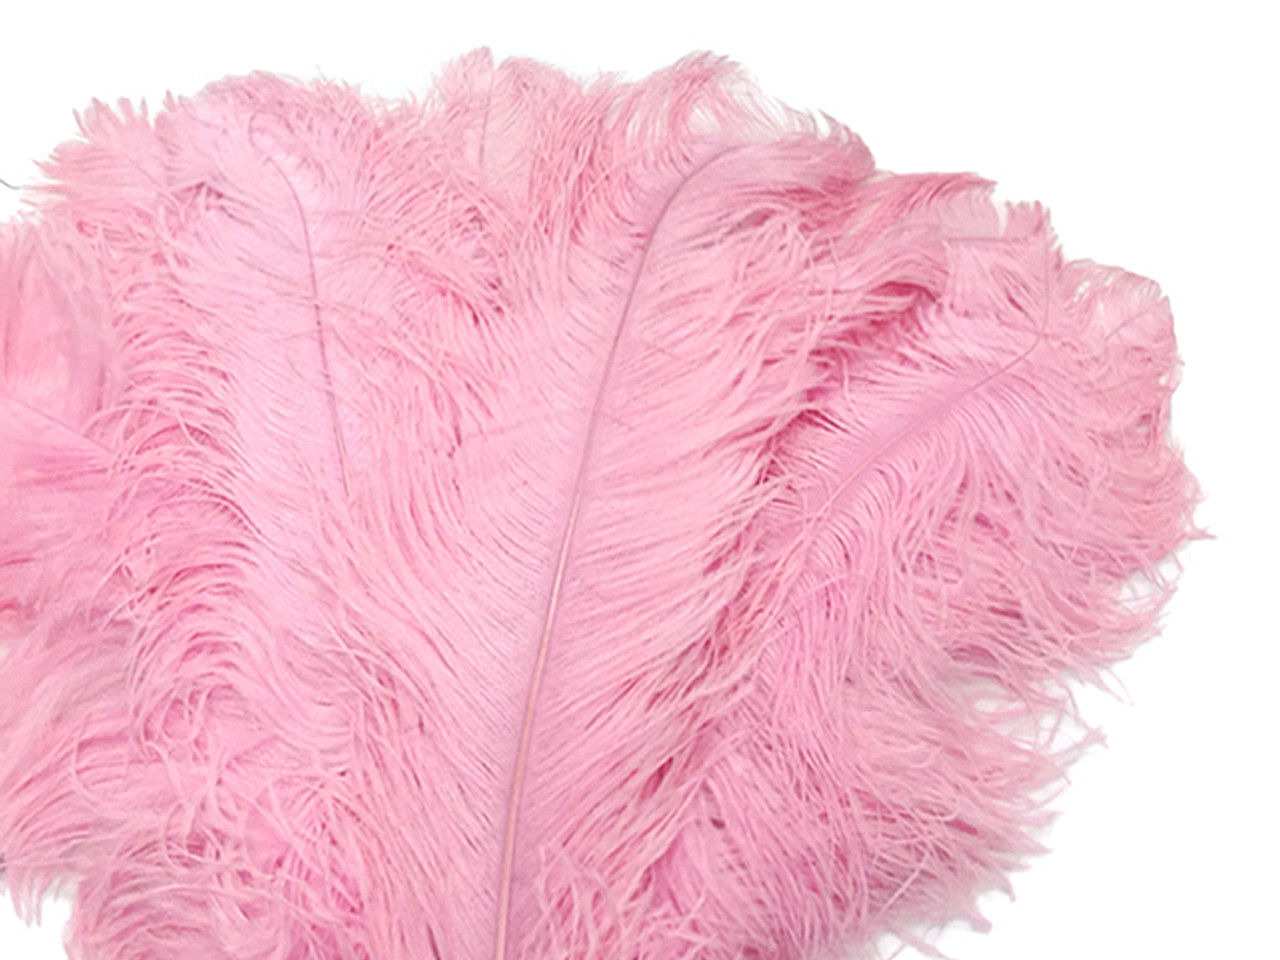 1/2 lb. - 18-24 Baby Pink Large Ostrich Wing Plume Wholesale Feathers (Bulk)